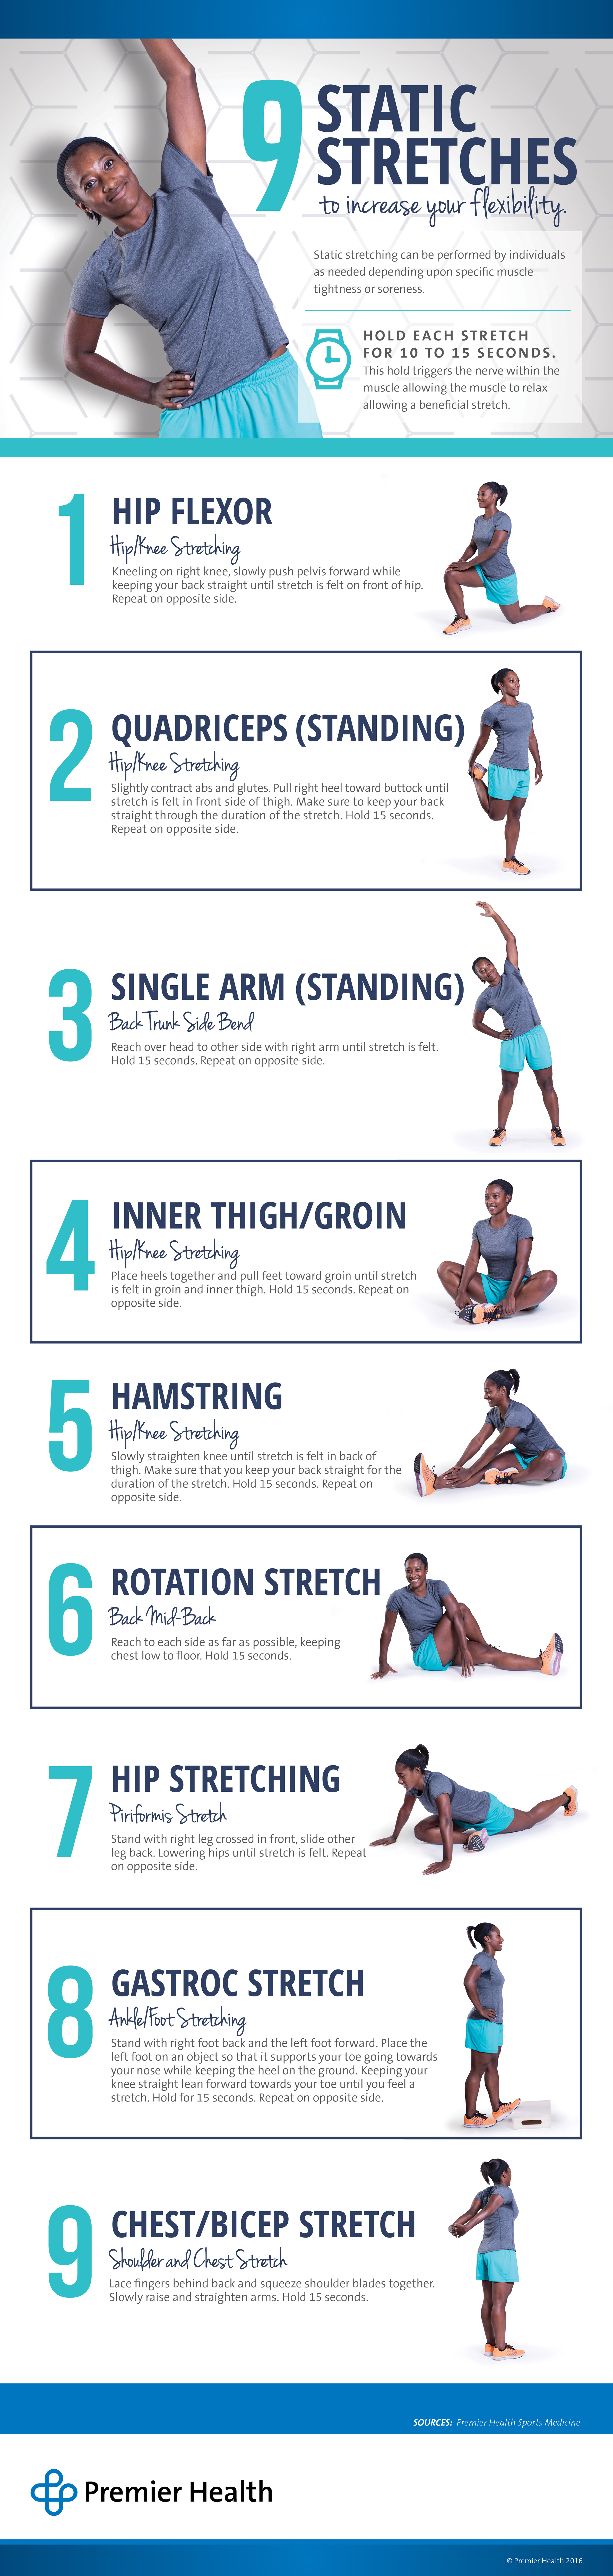 9 static stretches in content